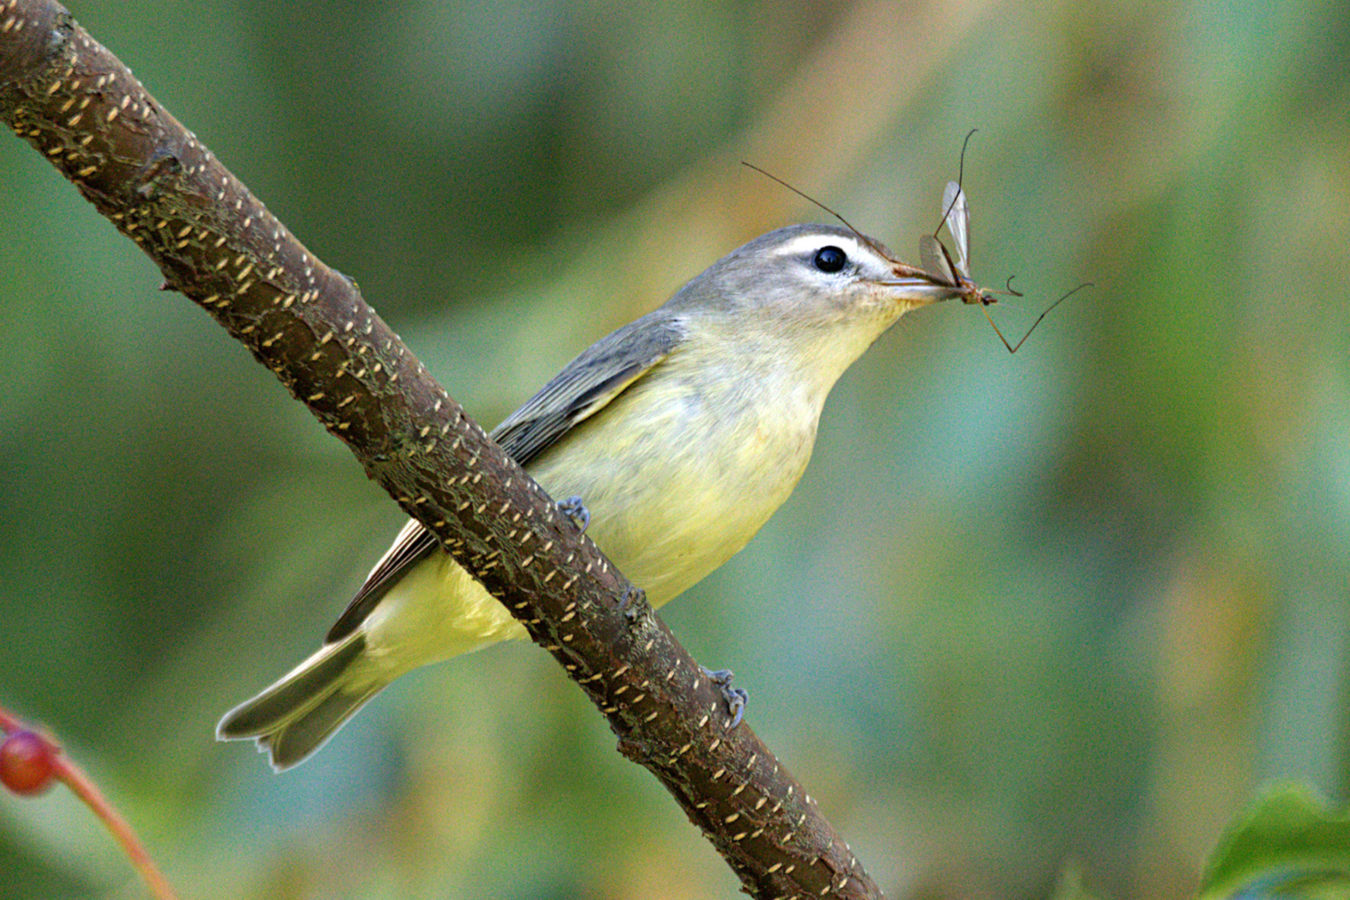 gray bird with yellow underside and insect in beak, perched on branch